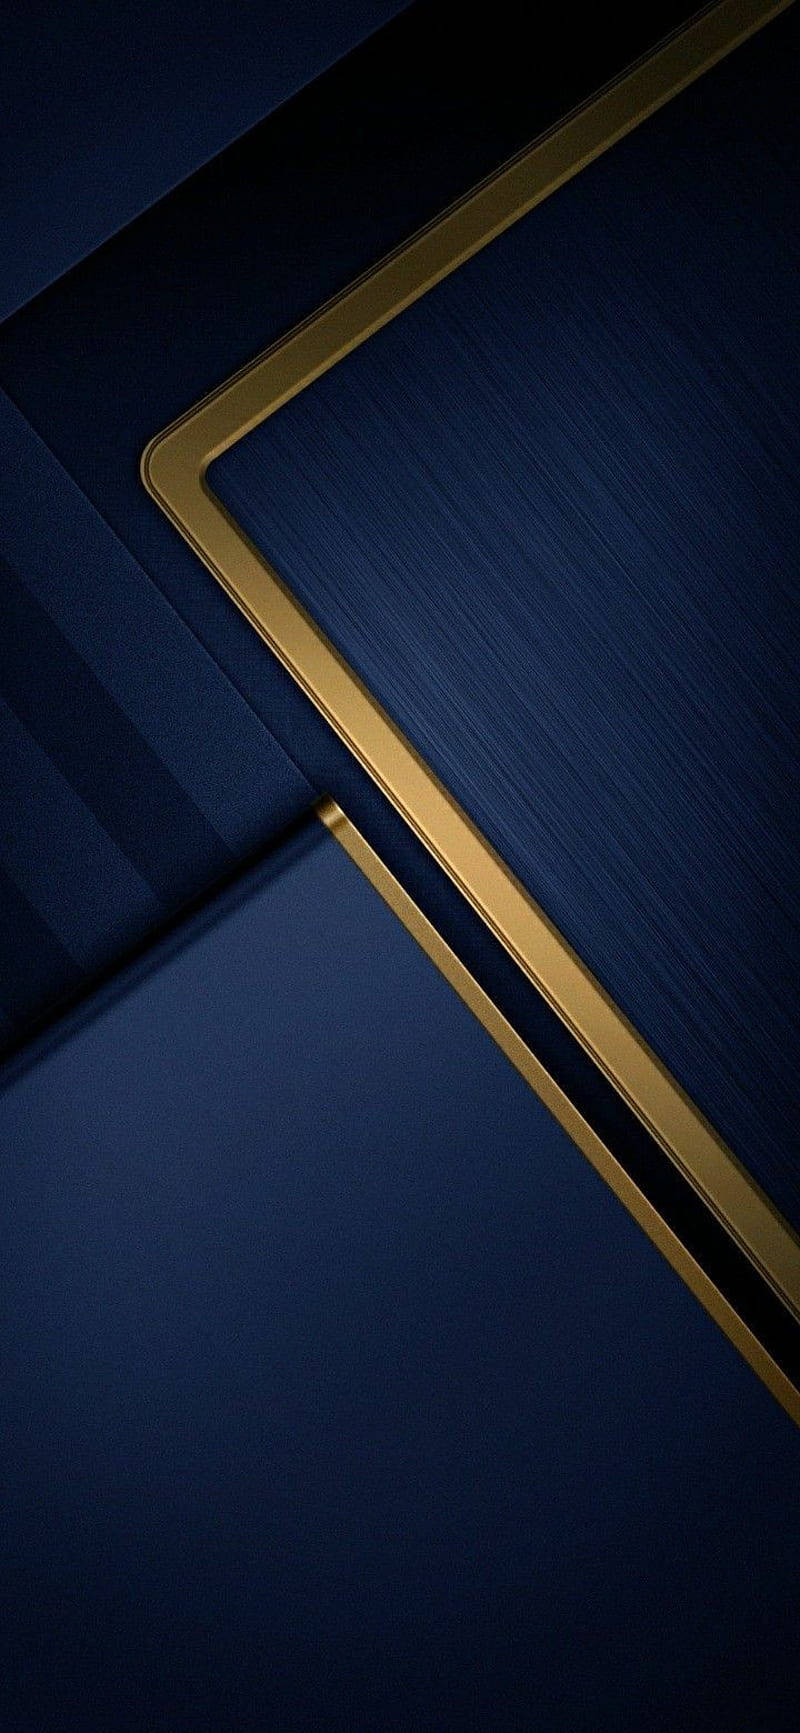 Diamonds by Engblad  Co  Dark Blue and Gold  Wallpaper  Wallpaper Direct